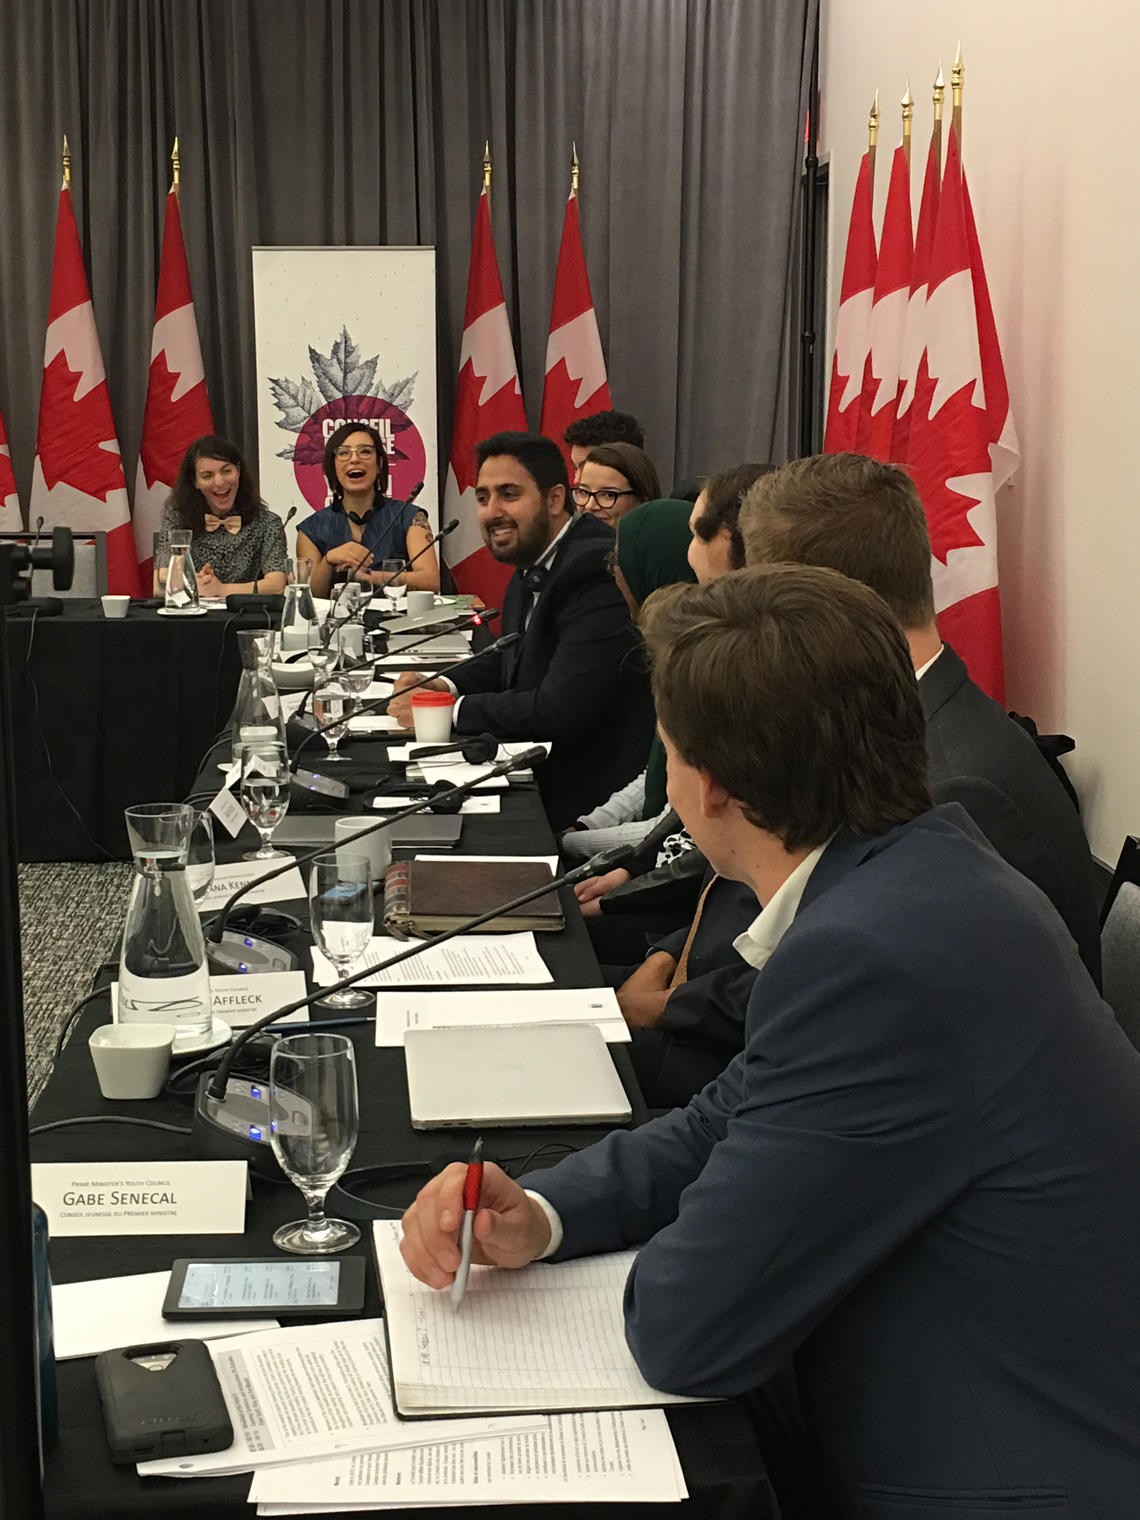 Grewal's two-year appointment to the Prime Minister’s Youth Council concludes in June 2020.